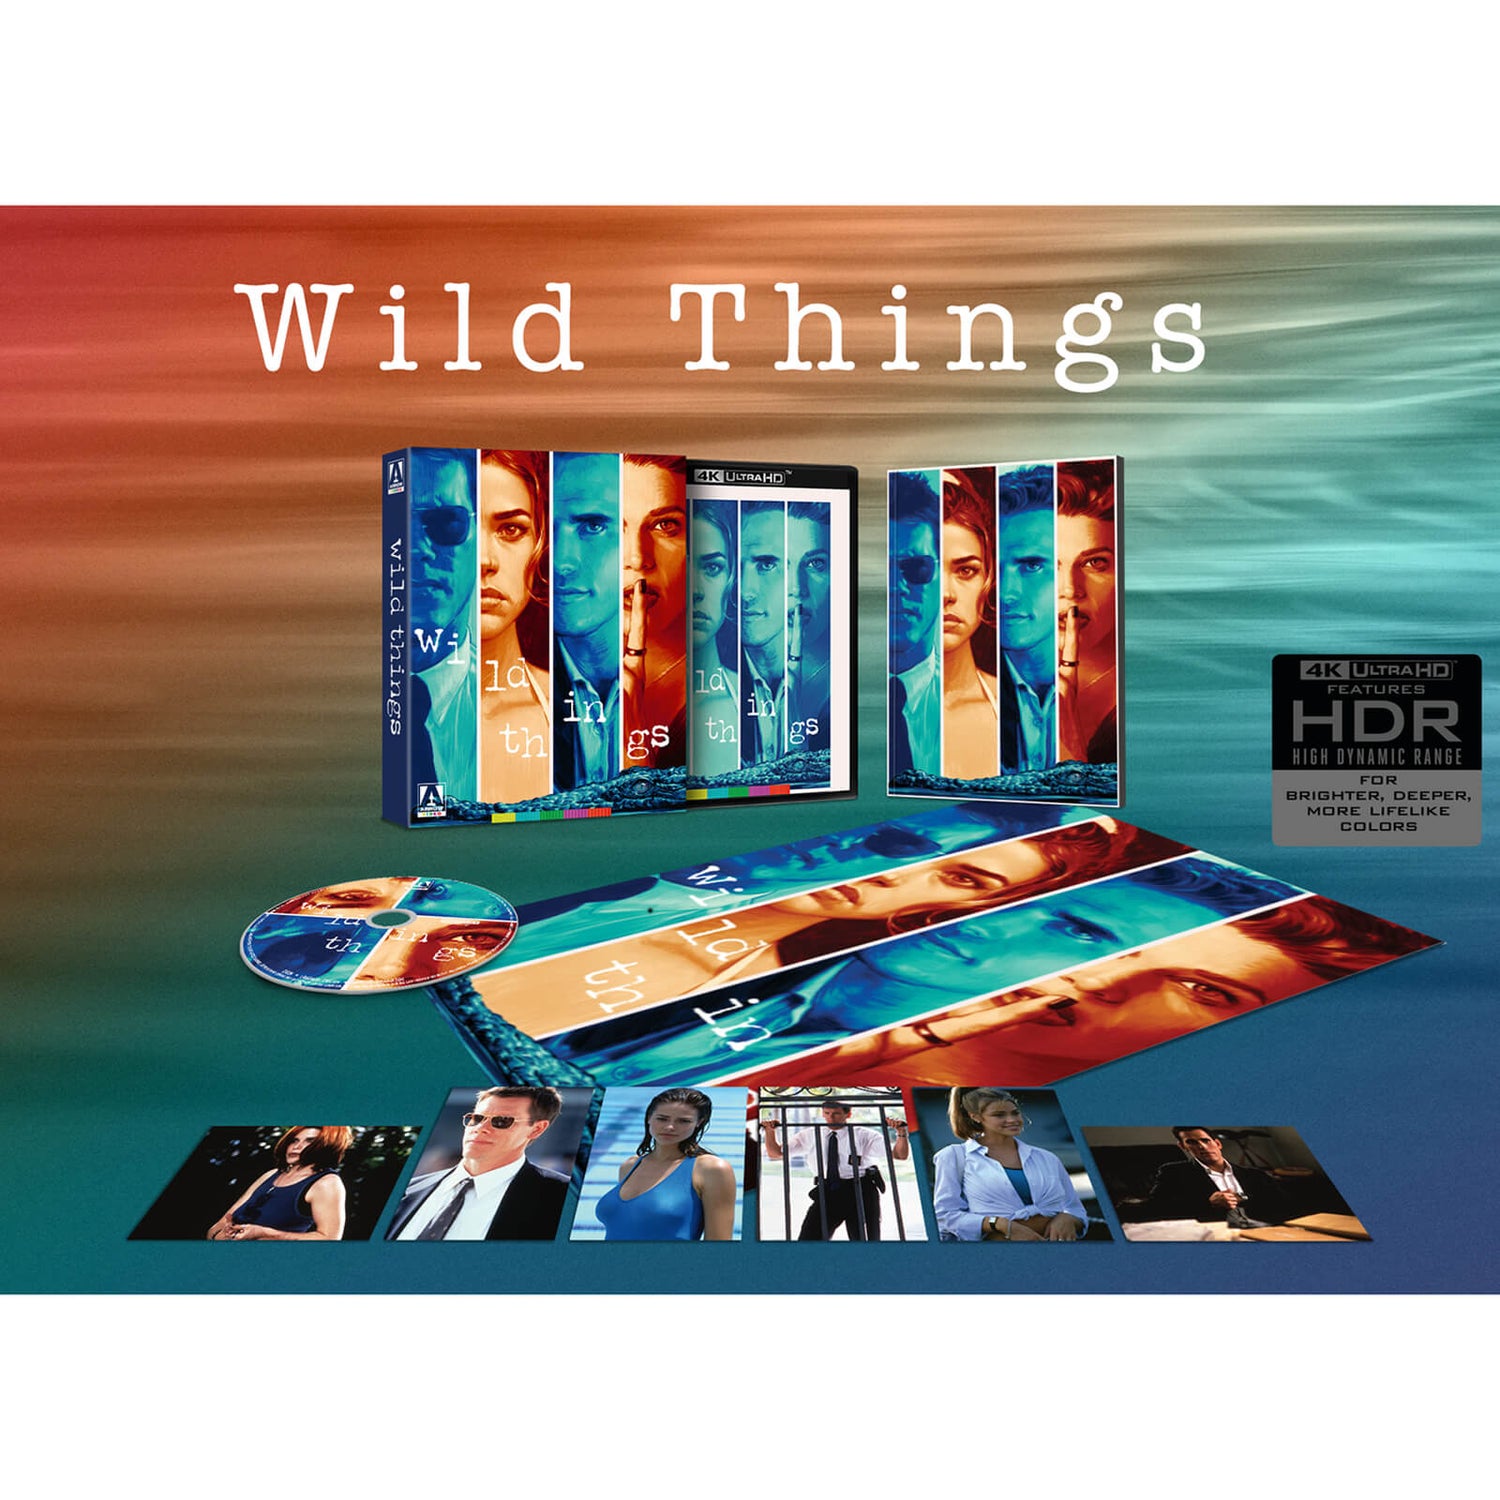 Wild Things Limited Edition SteelBook 4K UHD